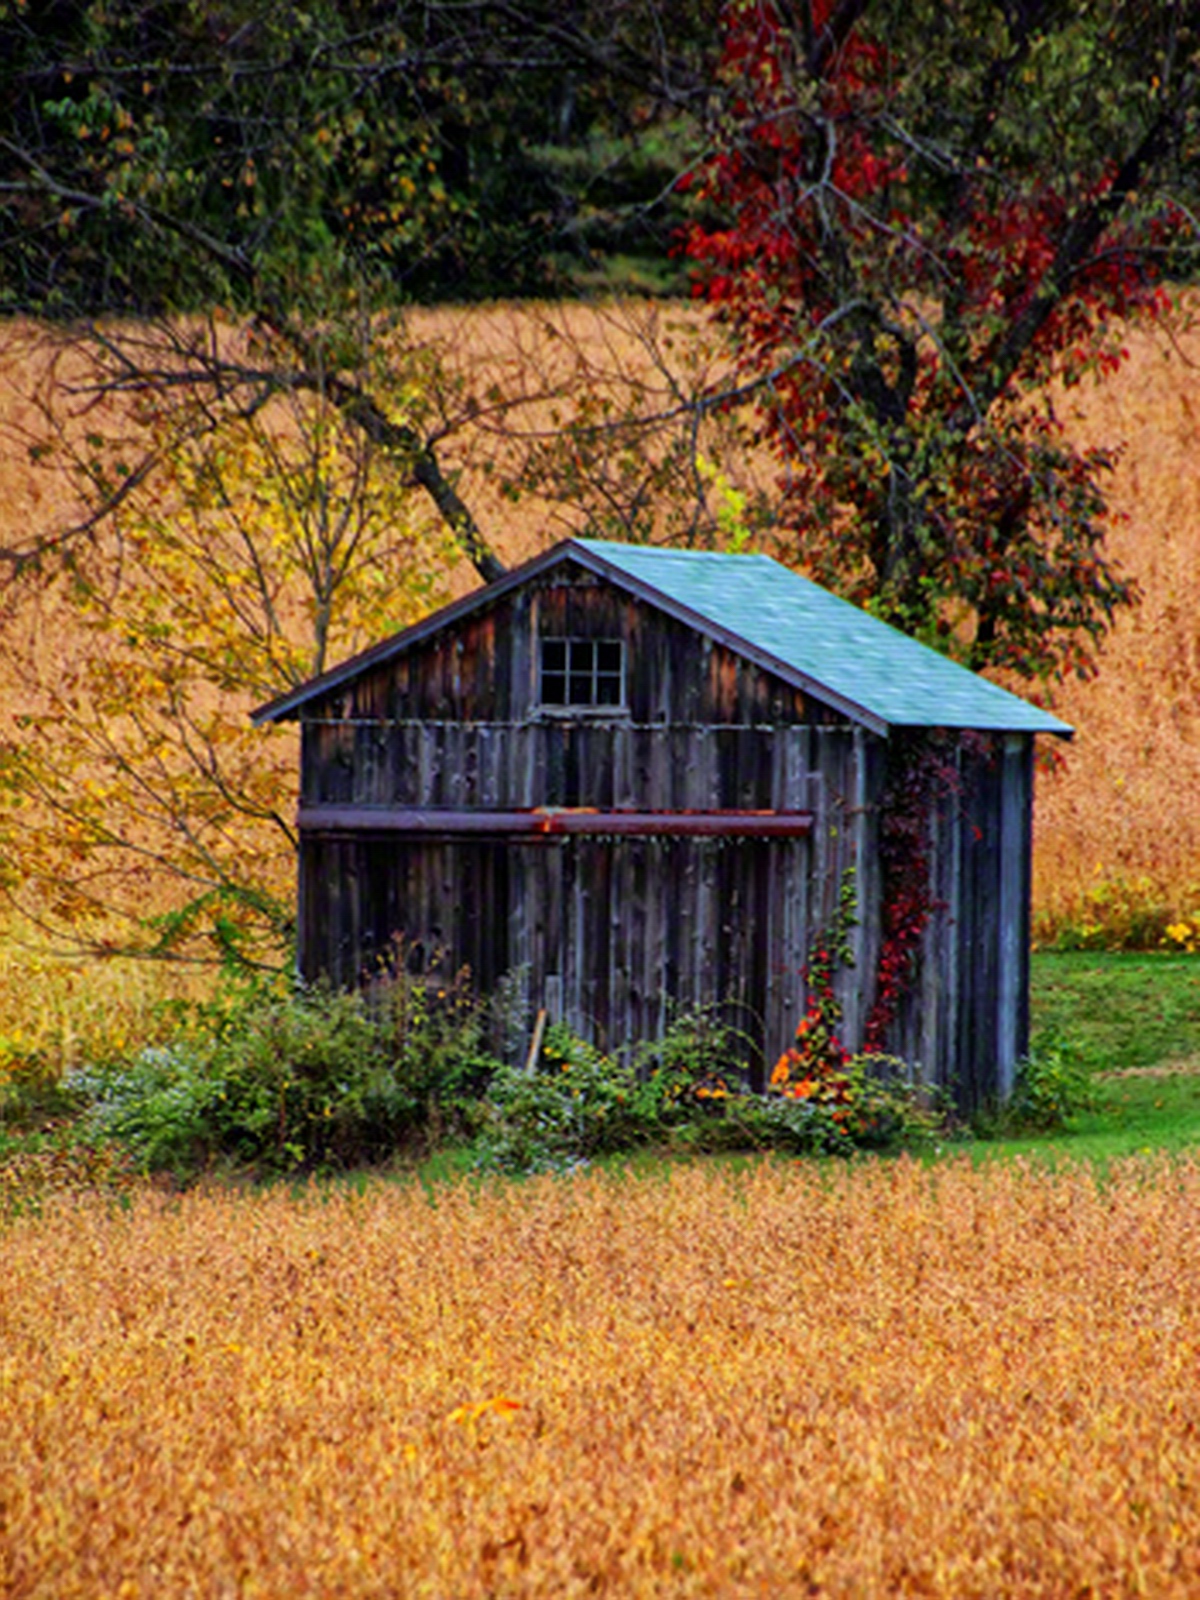 What once was a simple chicken coop is now an important part of a disappearing landscape.